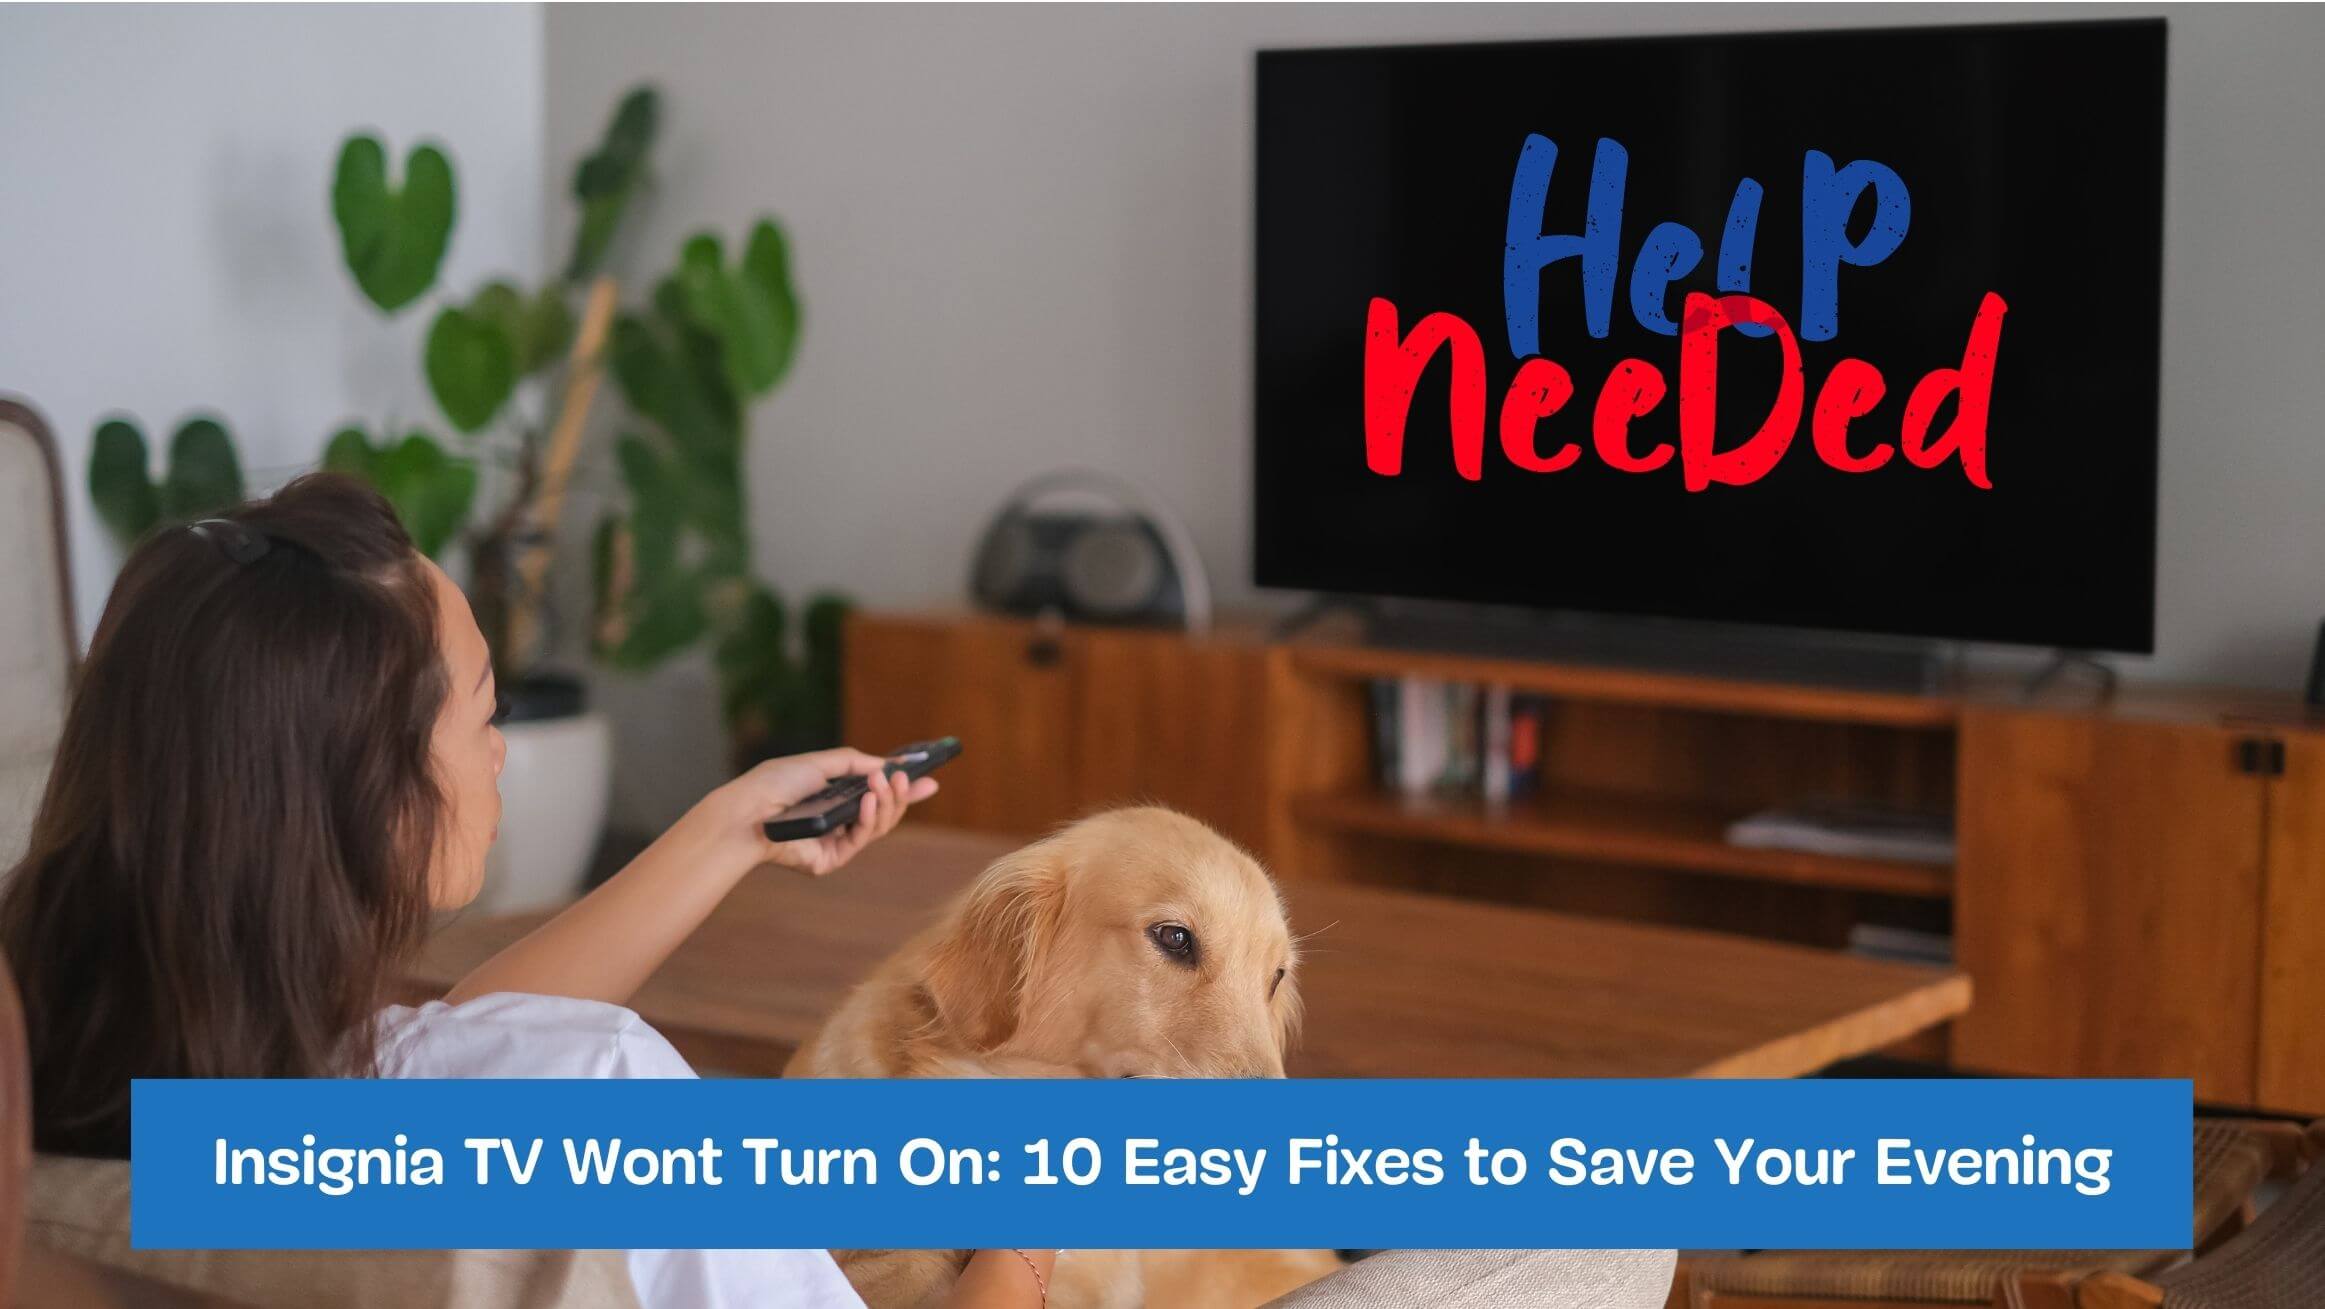 Insignia TV Wont Turn On: 10 Easy Fixes to Save Your Evening